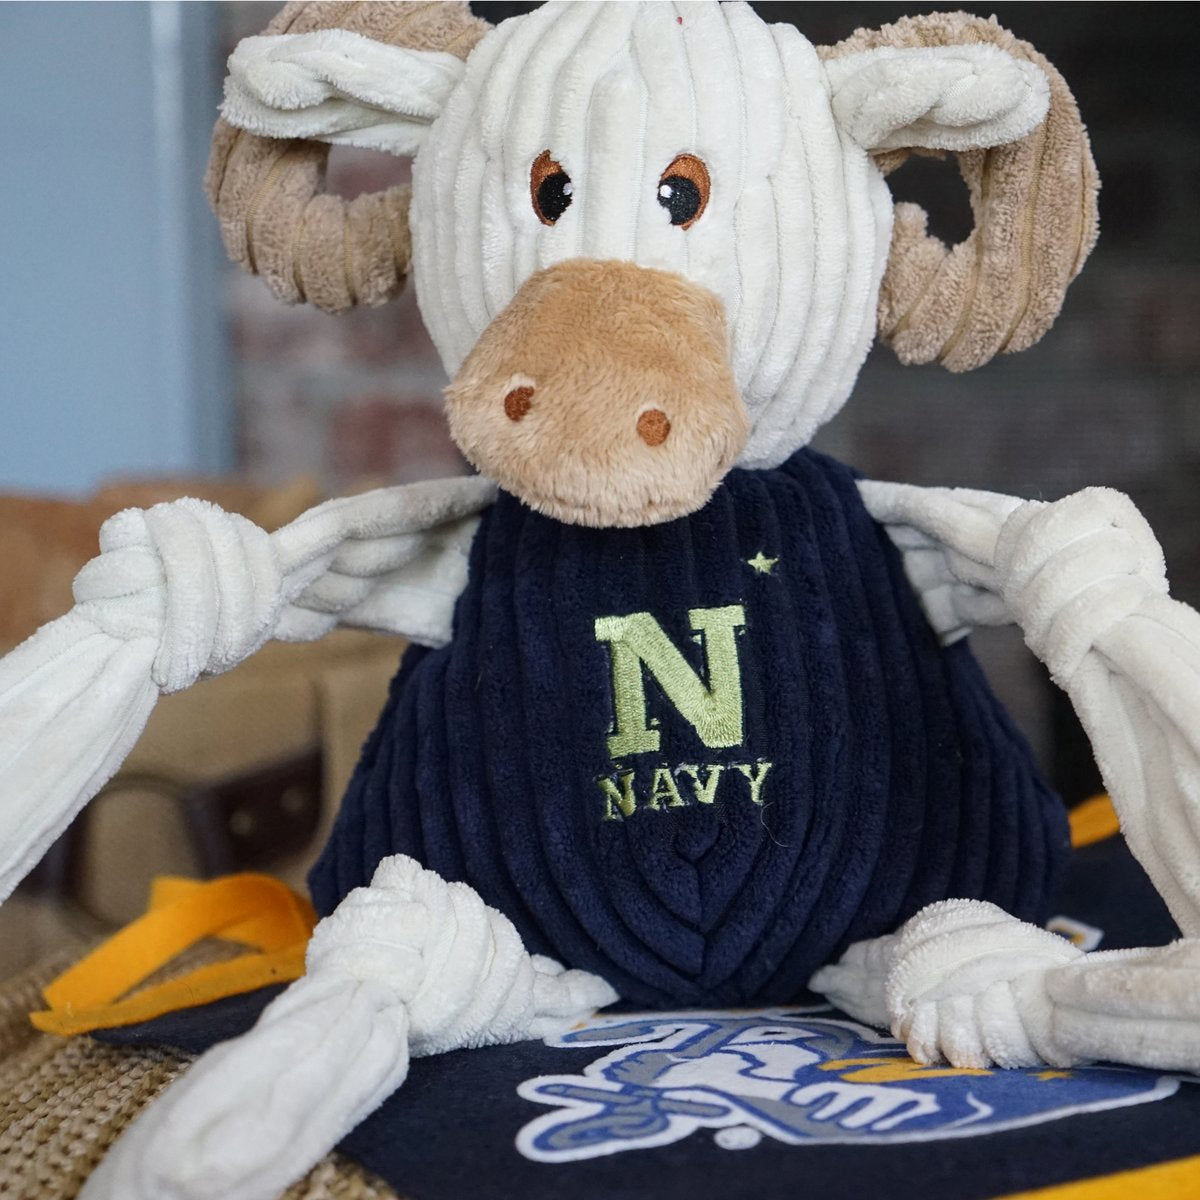 HuggleHounds Knottie Officially Licensed College Mascot Durable Squeaky Plush Dog Toy, Navy Midshipmen